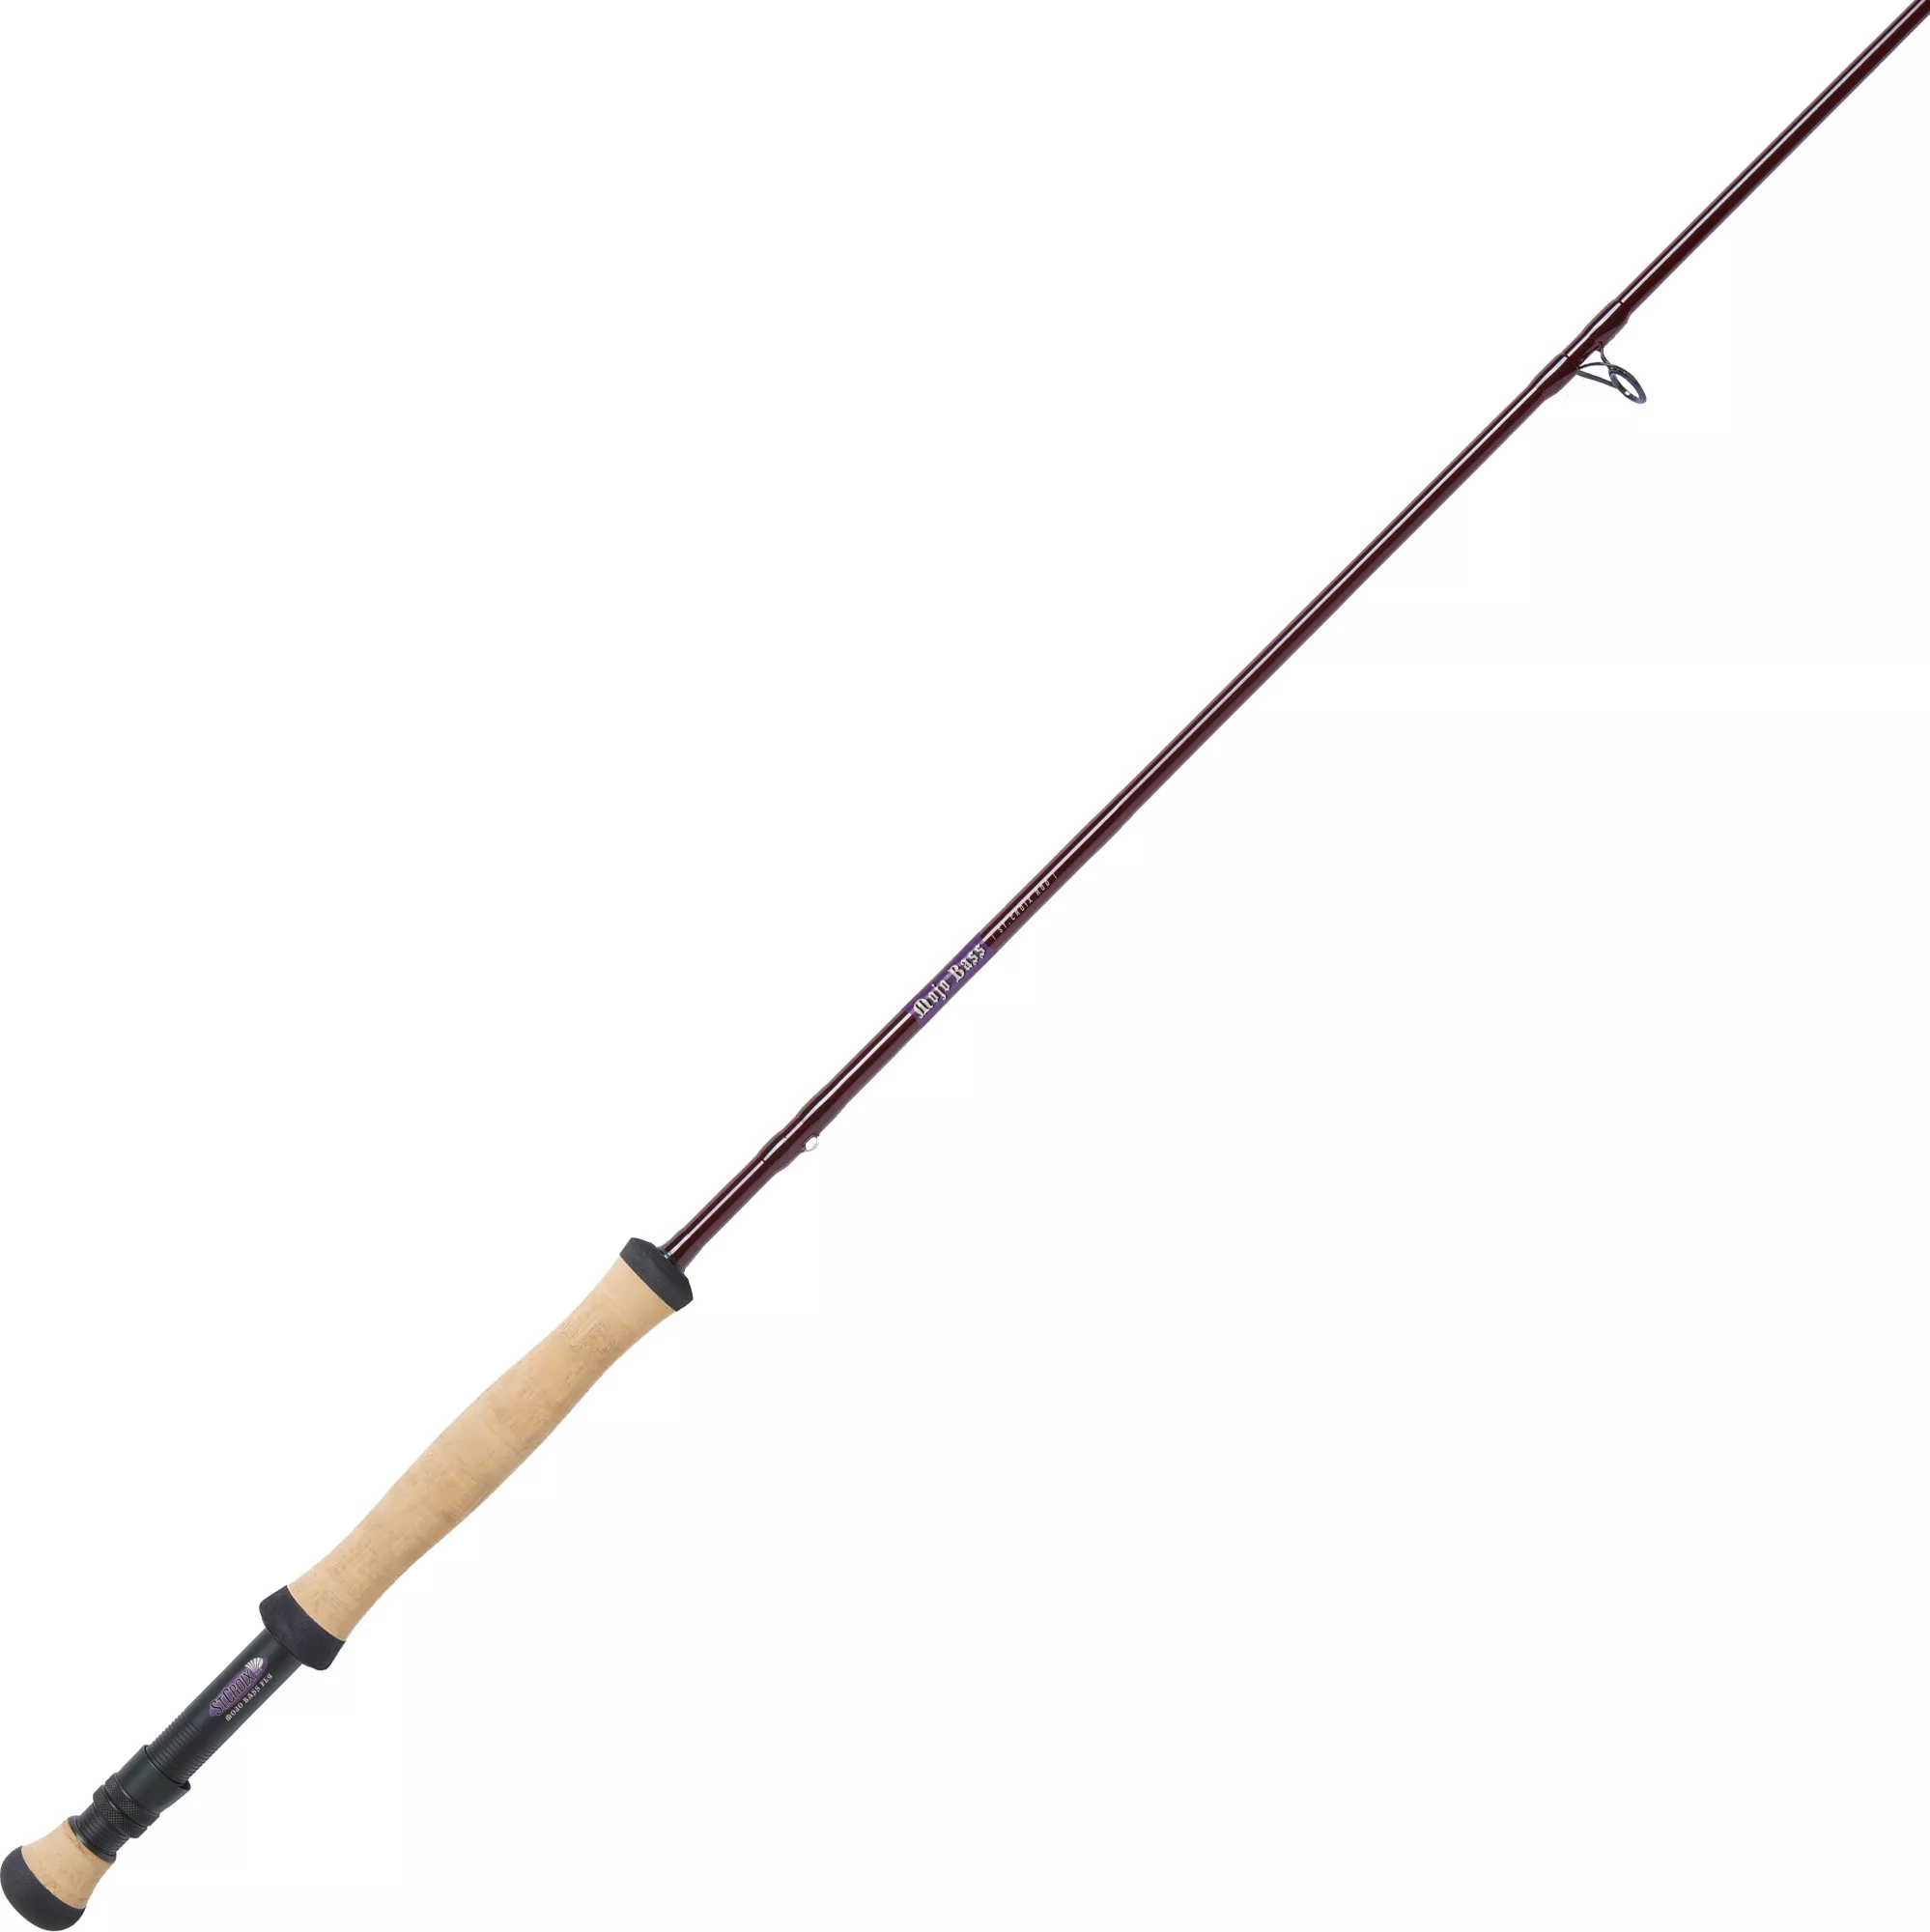 How to Buy a Fishing Rod